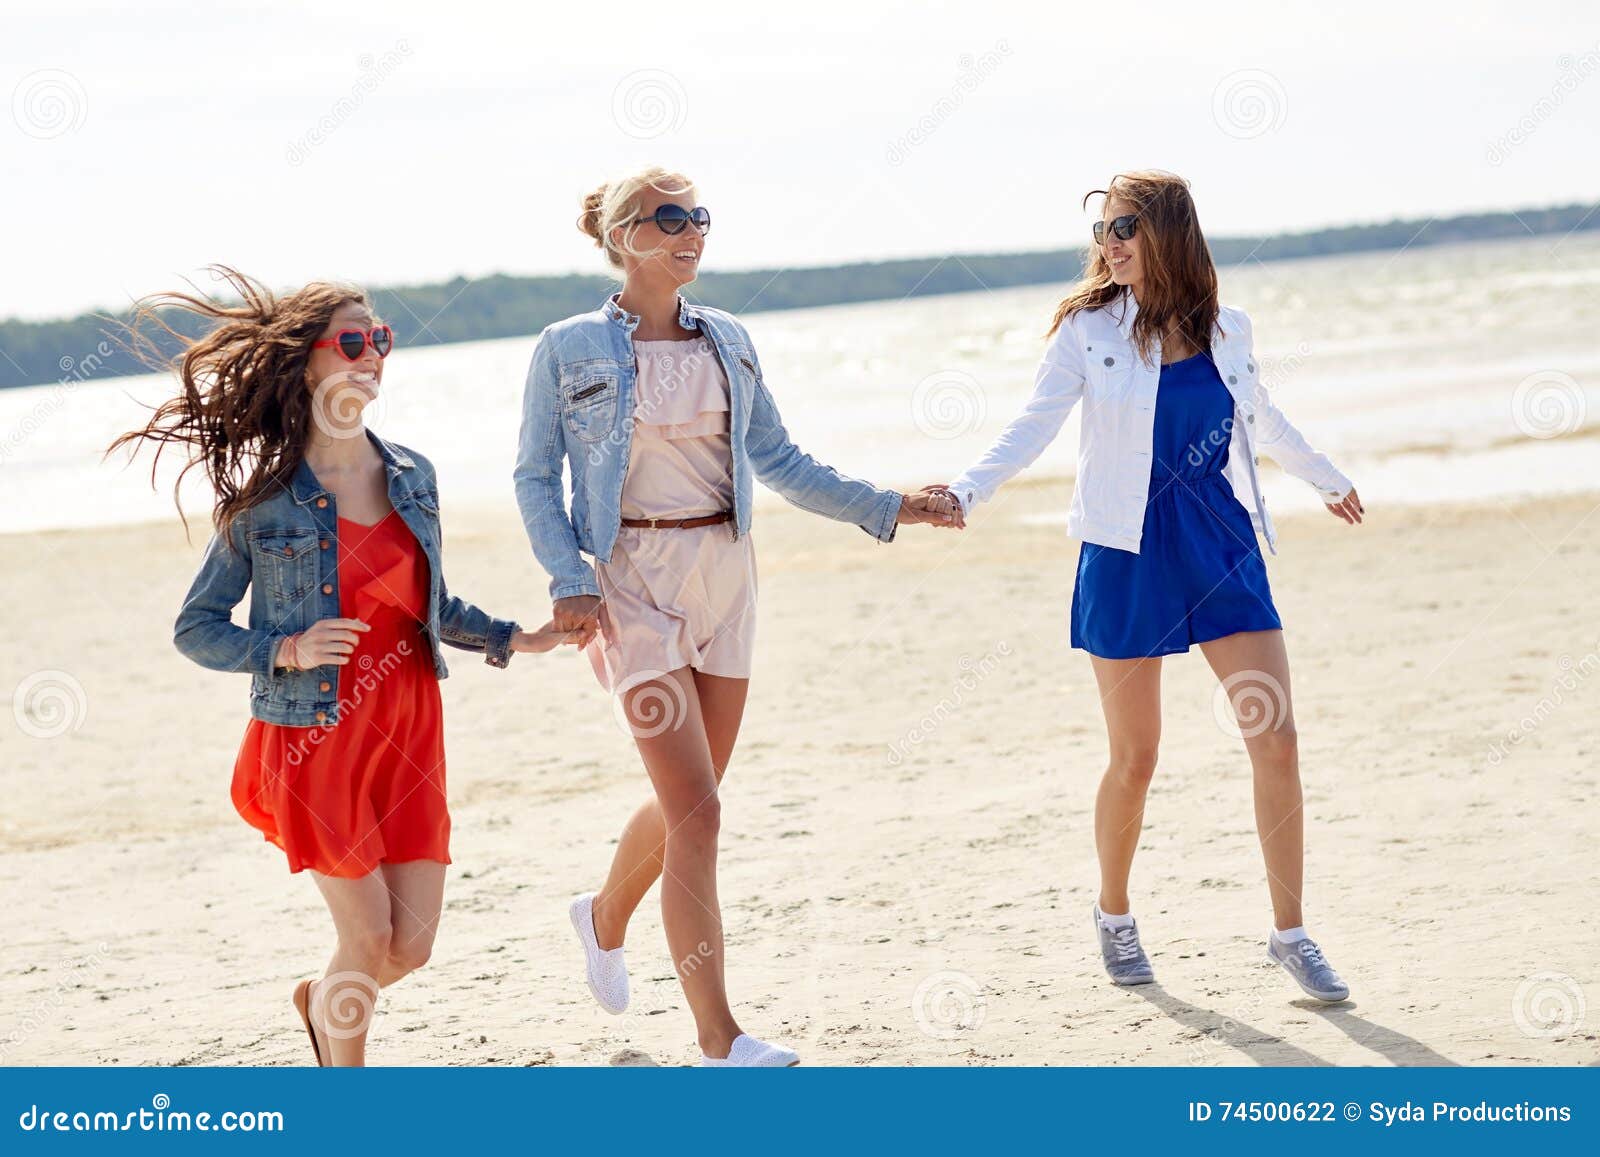 Group of Smiling Women in Sunglasses on Beach Stock Photo - Image of ...